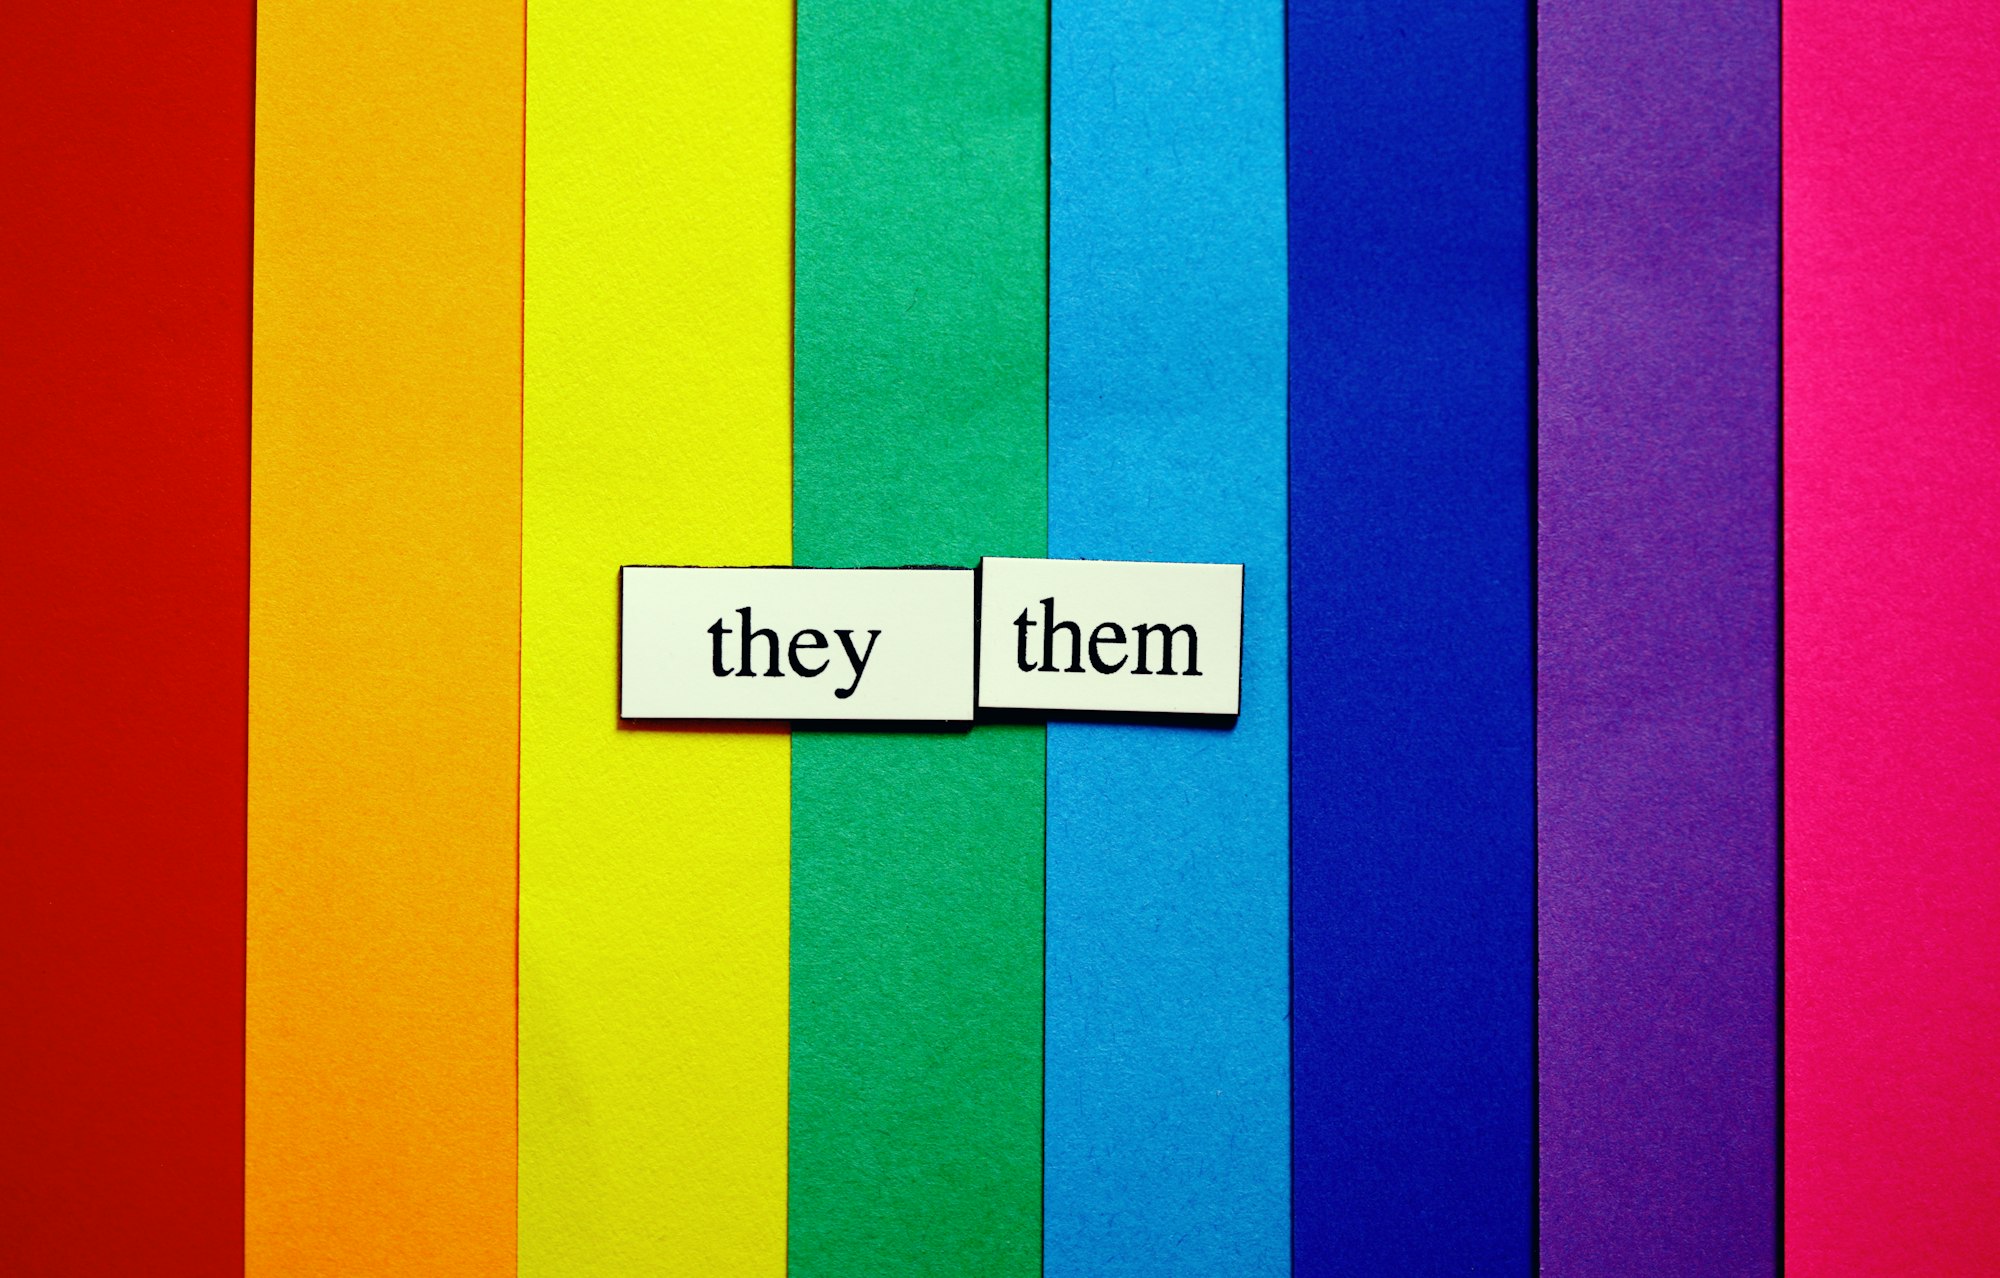 52 Weeks of Writing: Week 28—A word about pronouns